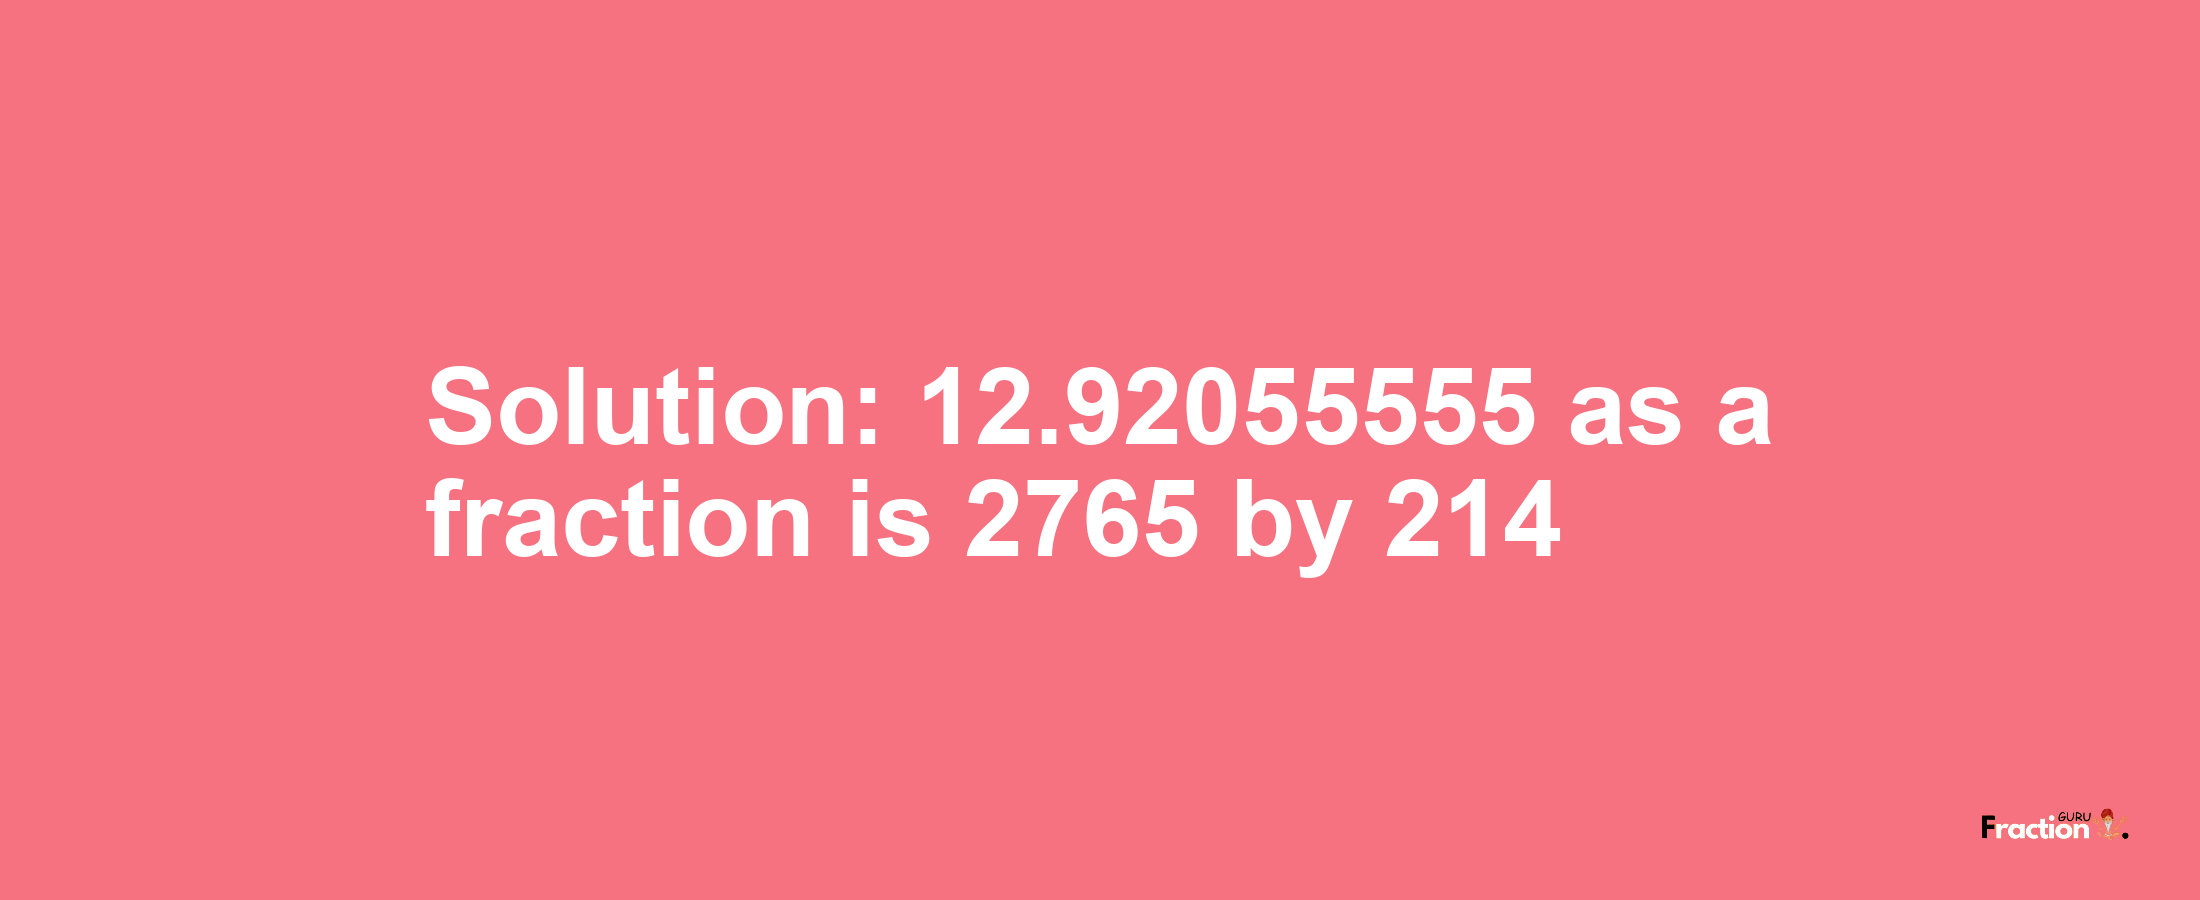 Solution:12.92055555 as a fraction is 2765/214